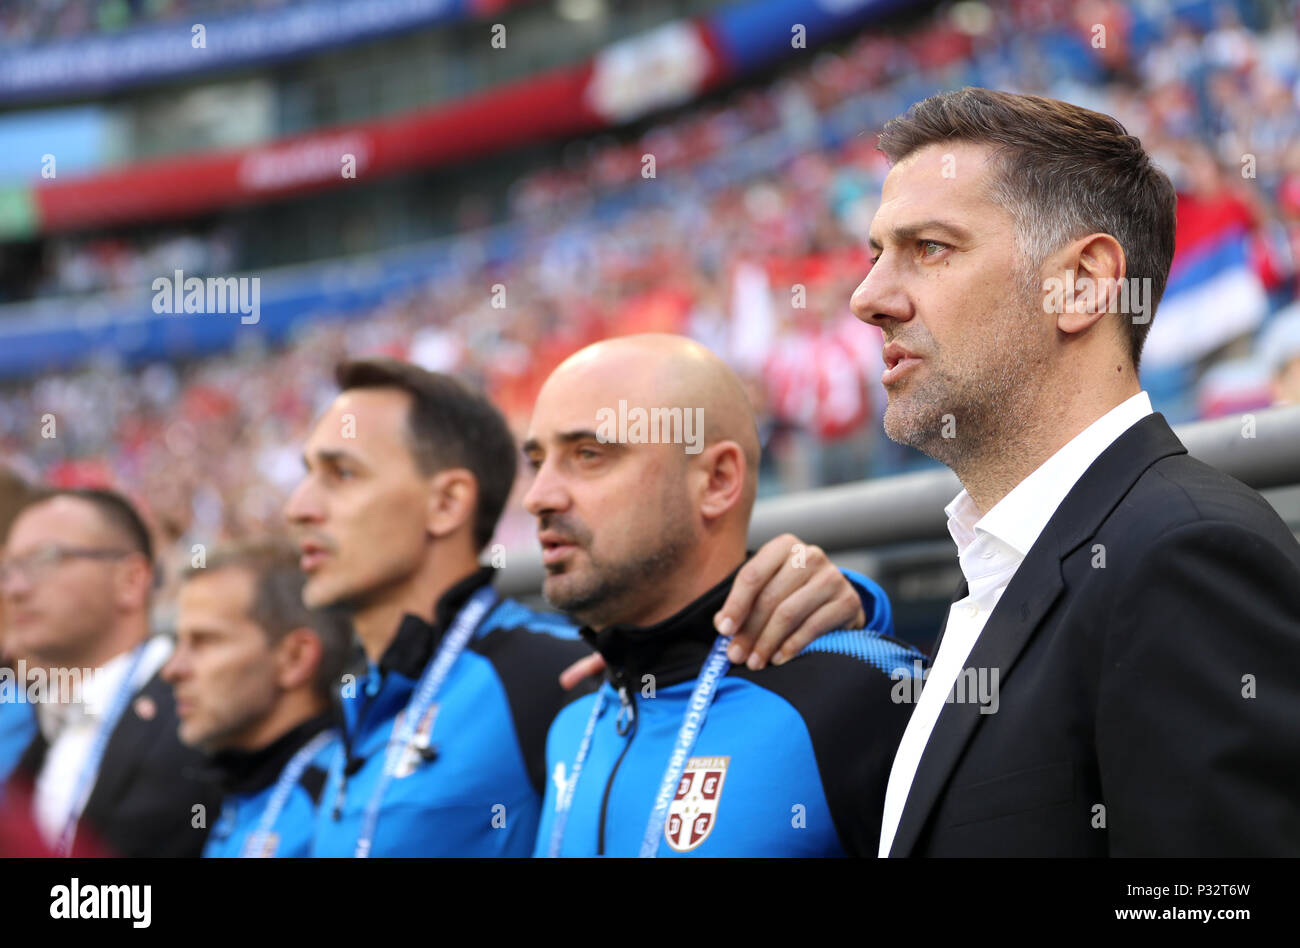 Samara, Russia. 17th June, 2018. Serbia's head coach Mladen Krstajic (1st R) is seen prior to a group E match between Costa Rica and Serbia at the 2018 FIFA World Cup in Samara, Russia, June 17, 2018. Credit: Fei Maohua/Xinhua/Alamy Live News Stock Photo